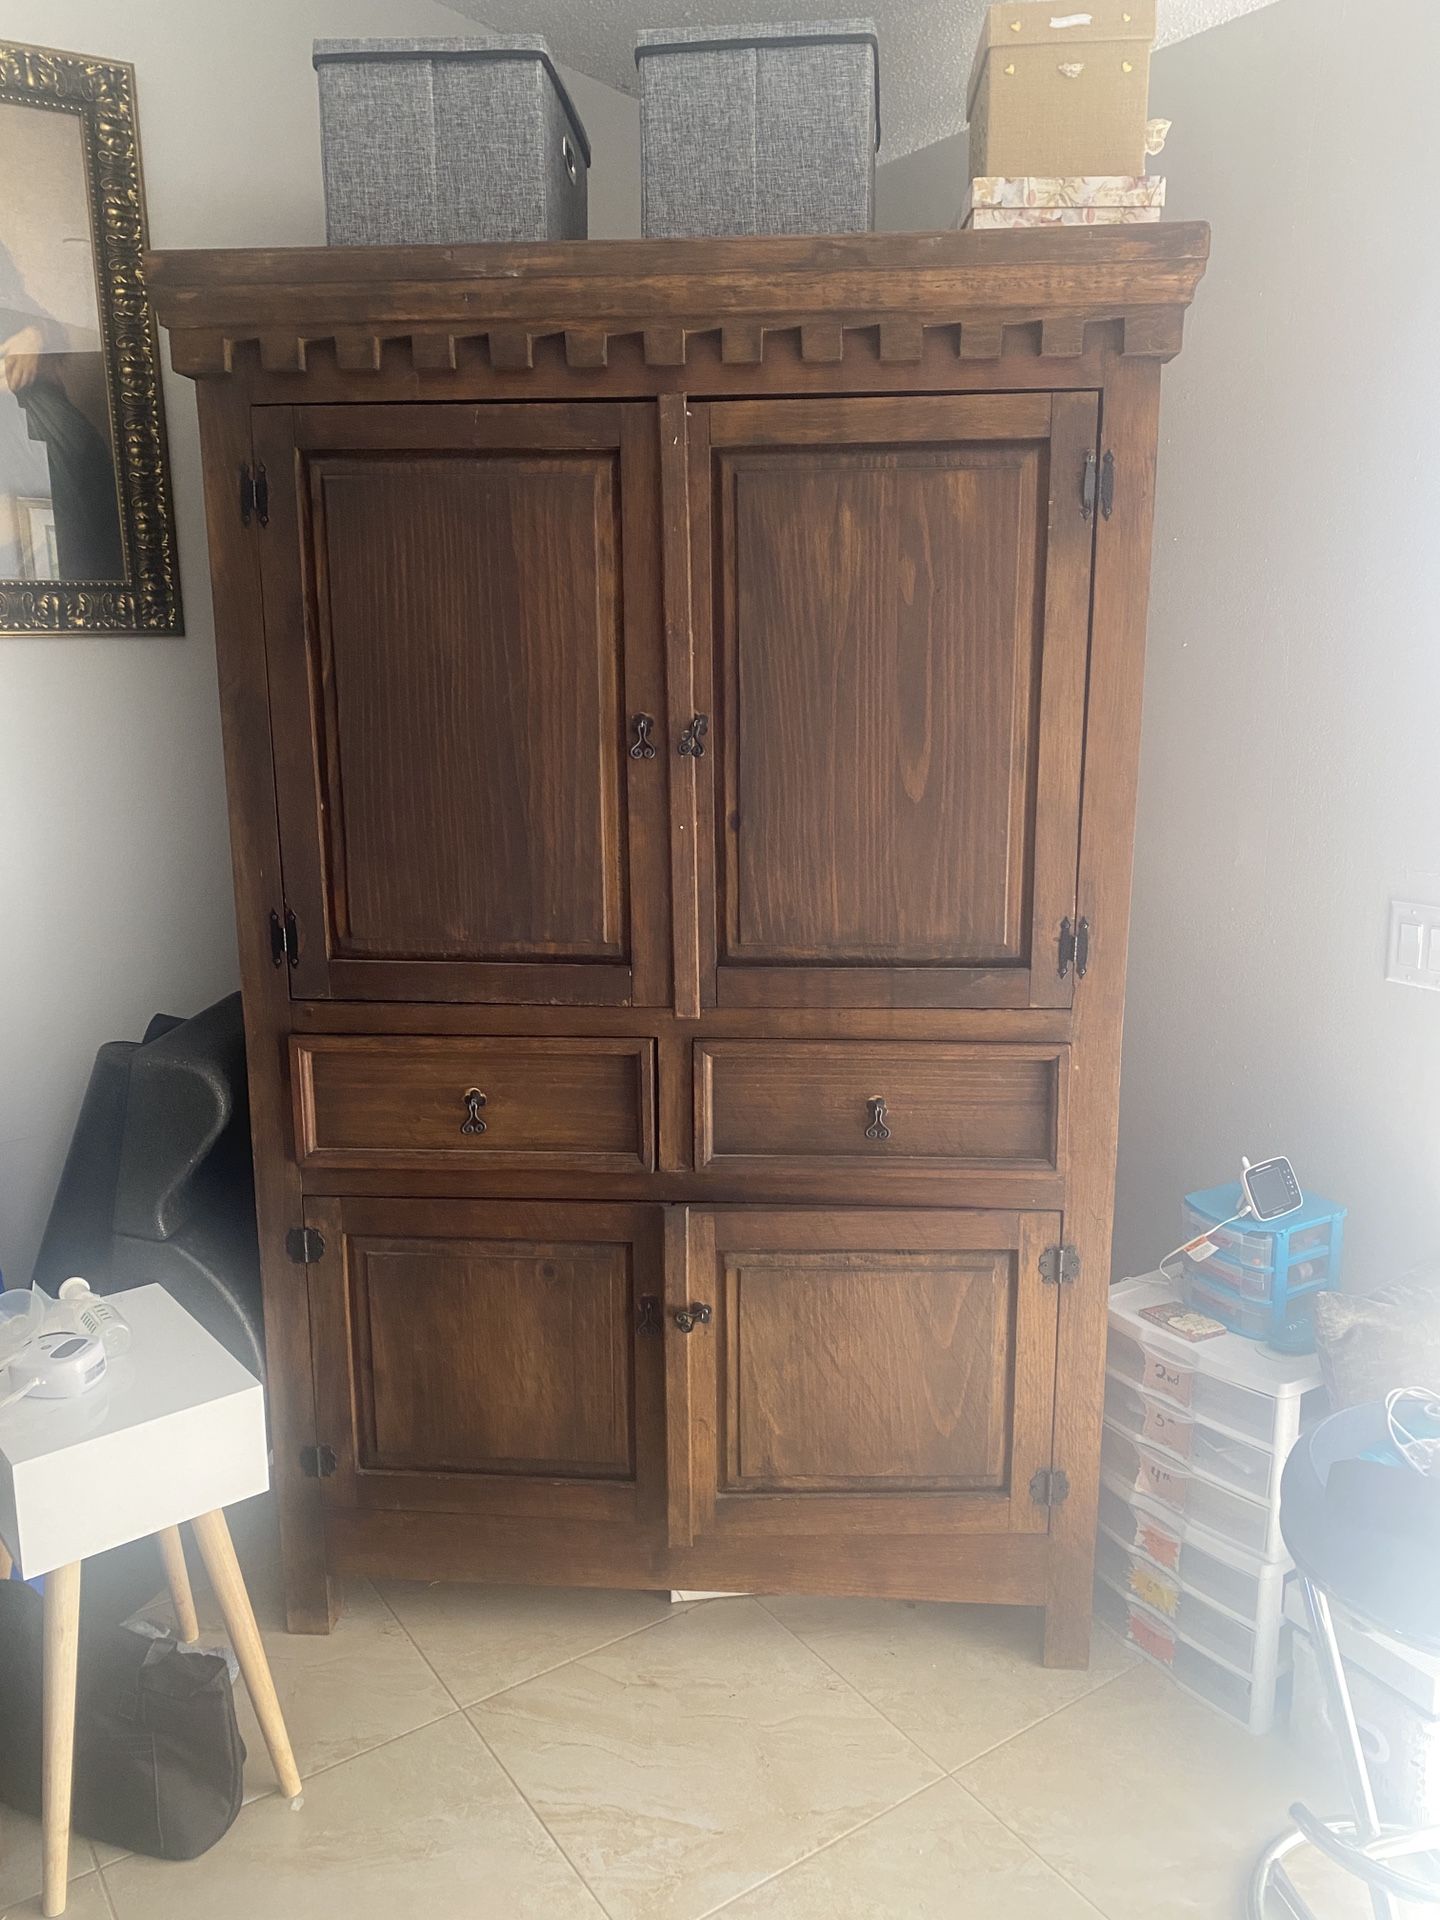 Large Antique Armoire Real Wood Lots Of Space Inside